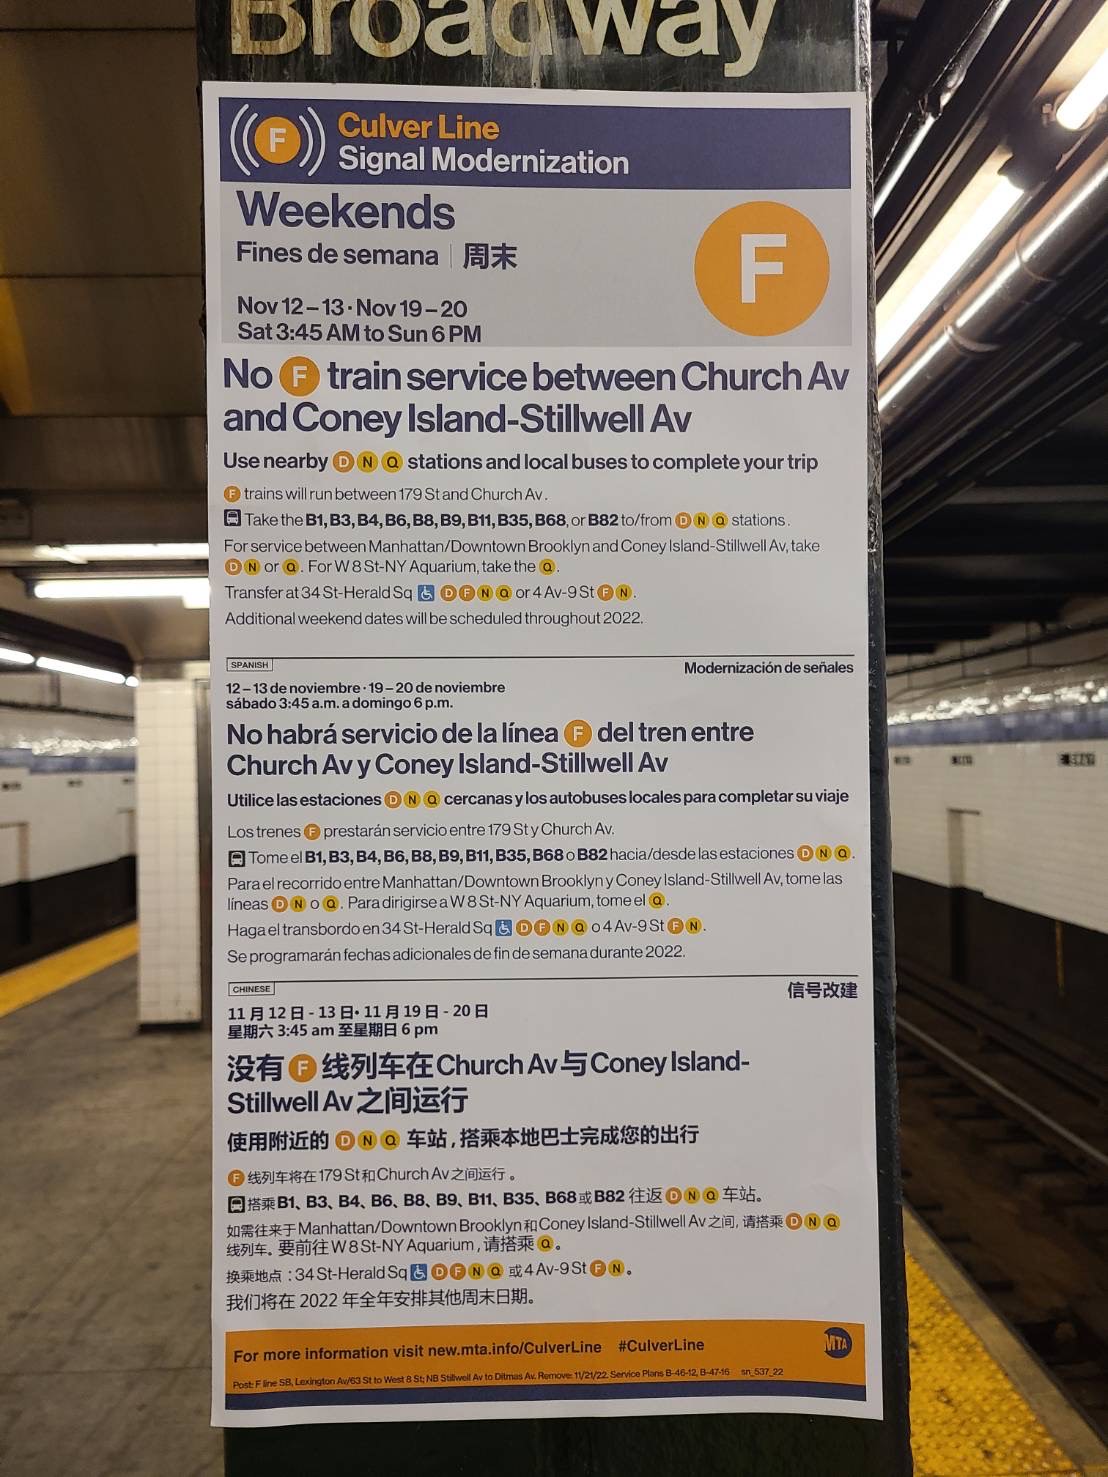 The poster details how signal modernization work on the F line will cause disruptions to F train service, in English, Spanish, and Simplified Chinese.